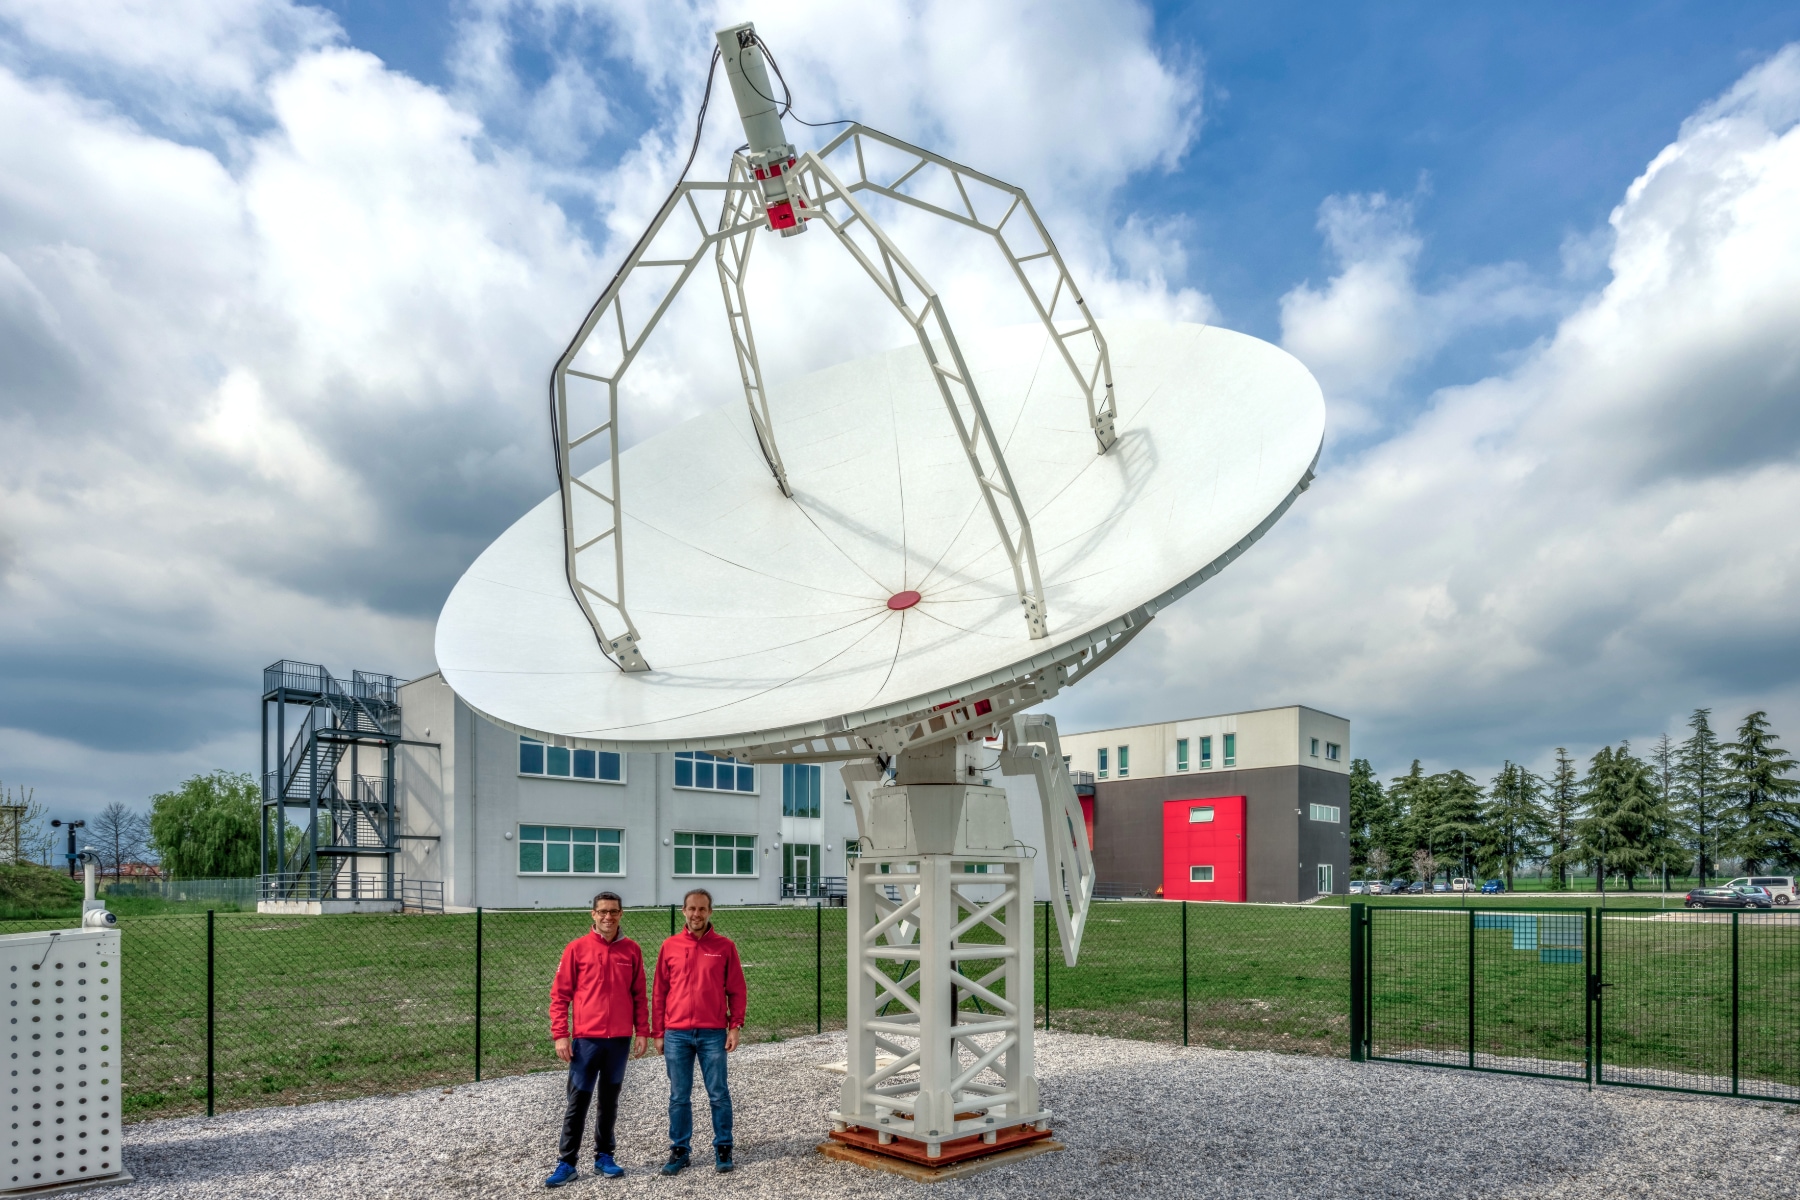 INTREPID ground stations for space communication: main features